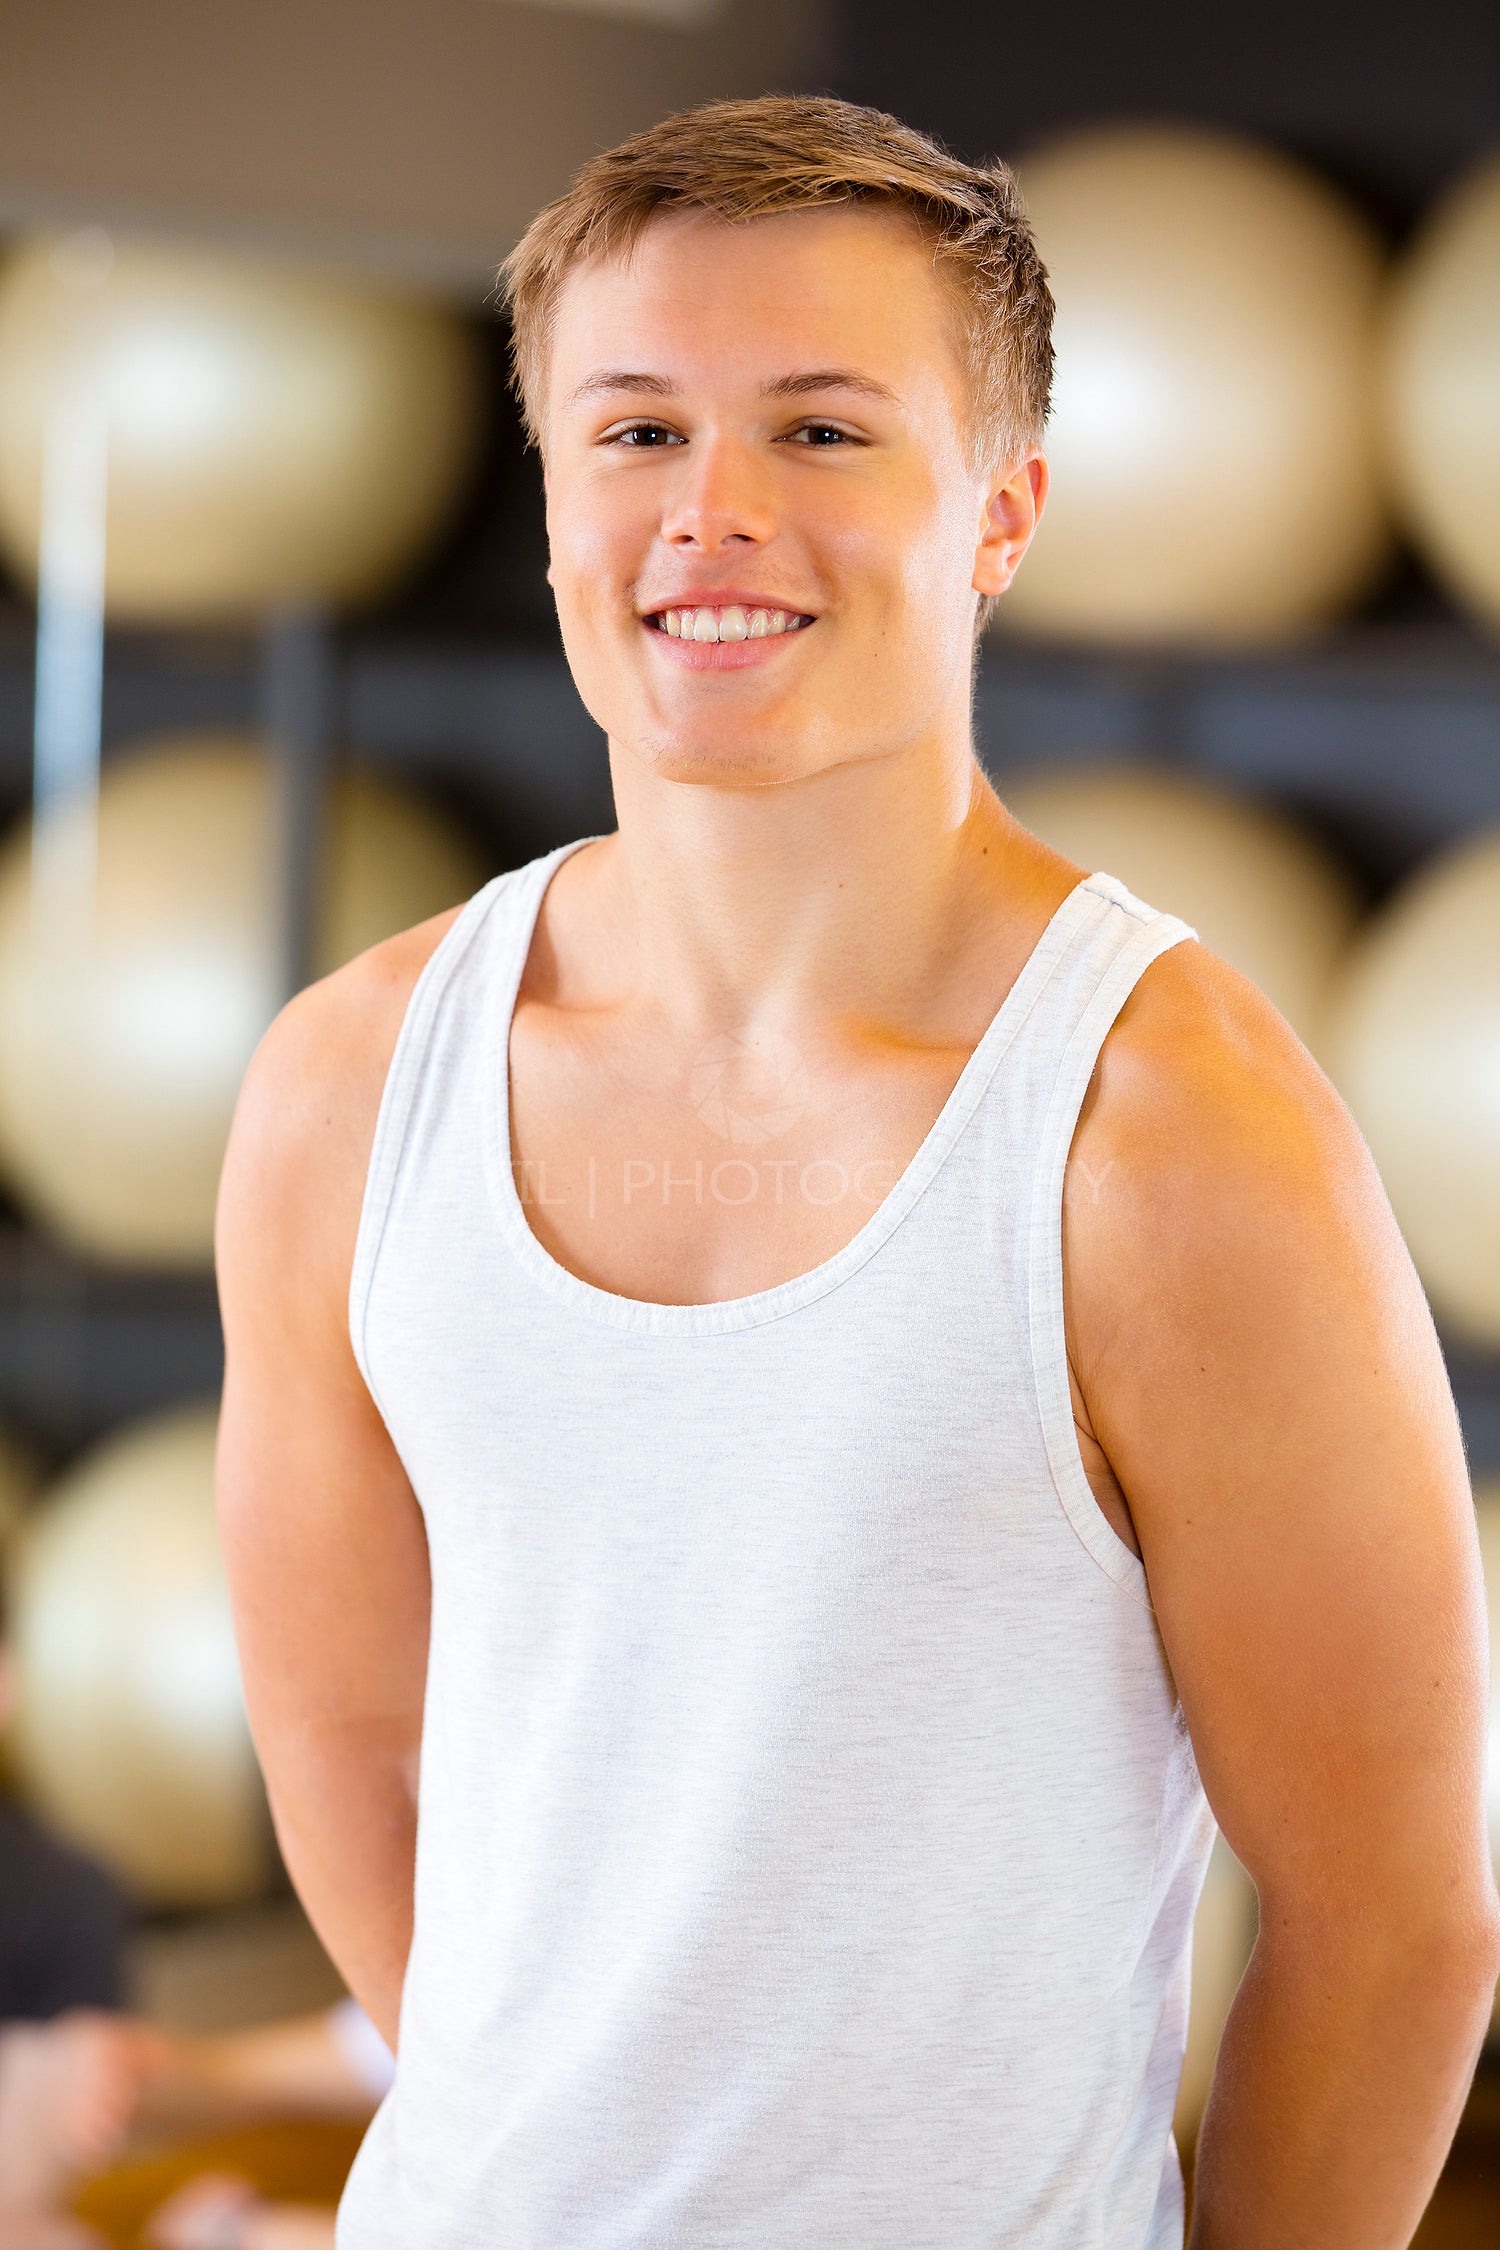 Smiling young man in workout outfit at fitness gym